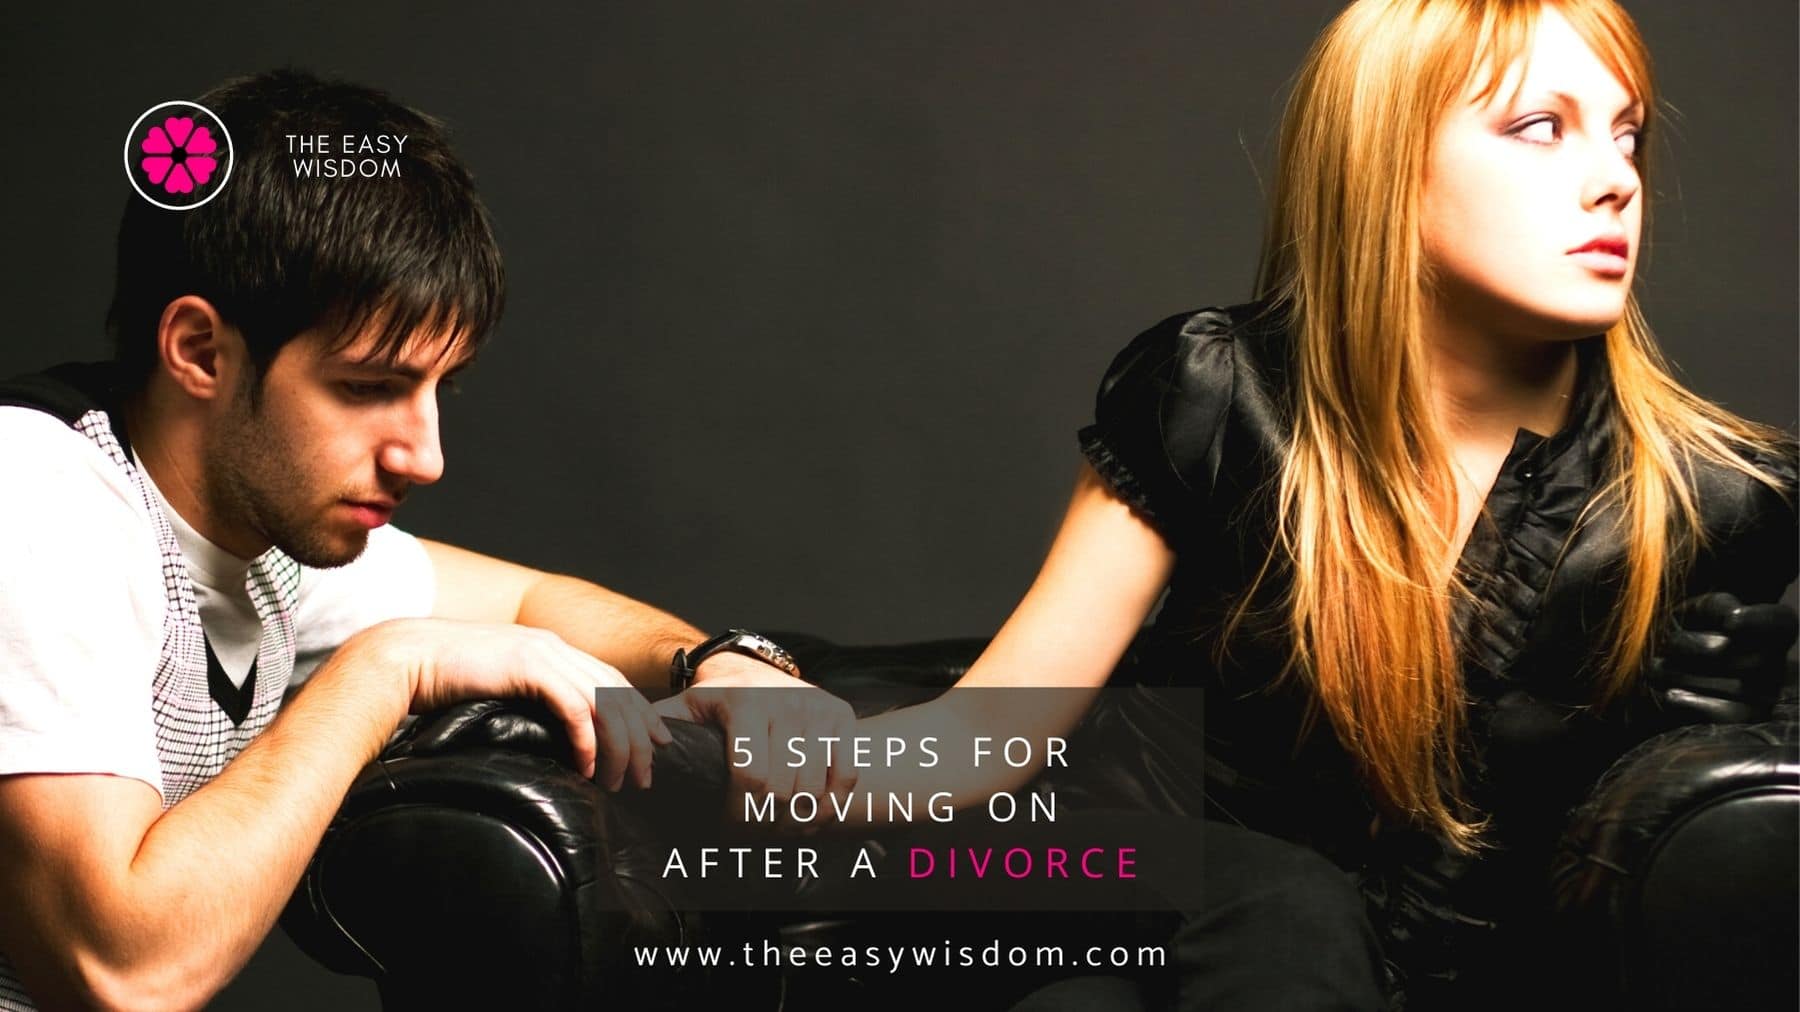 5 Steps for Moving on After a Divorce and Rebuilding Your Life!